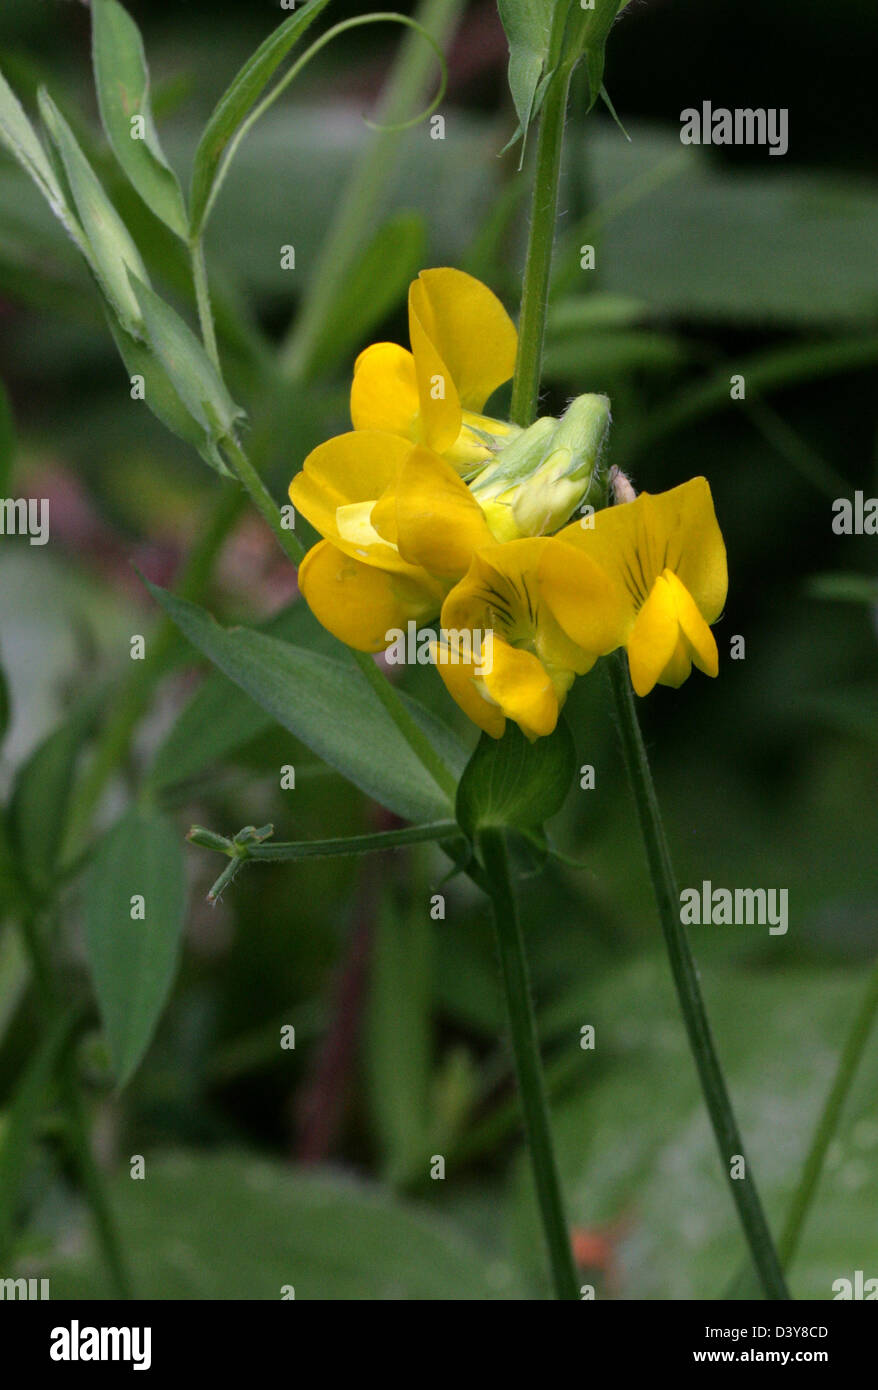 Meadow Vetchling, Lathyrus pratensis, Fabaceae. Stock Photo